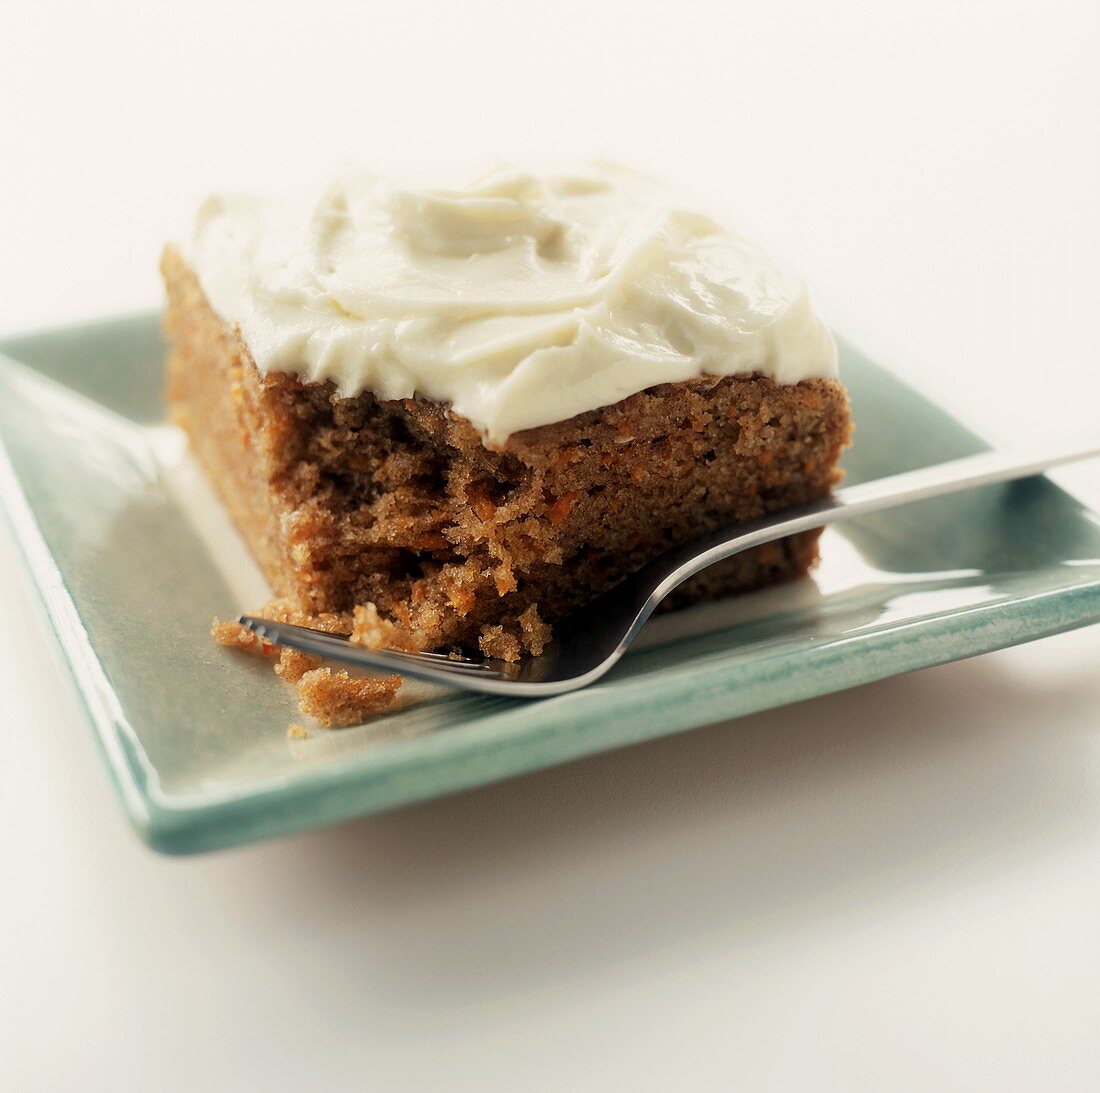 A Square Piece of Carrot Cake with Cream Cheese Frosting on a Square Green Plate with a Fork